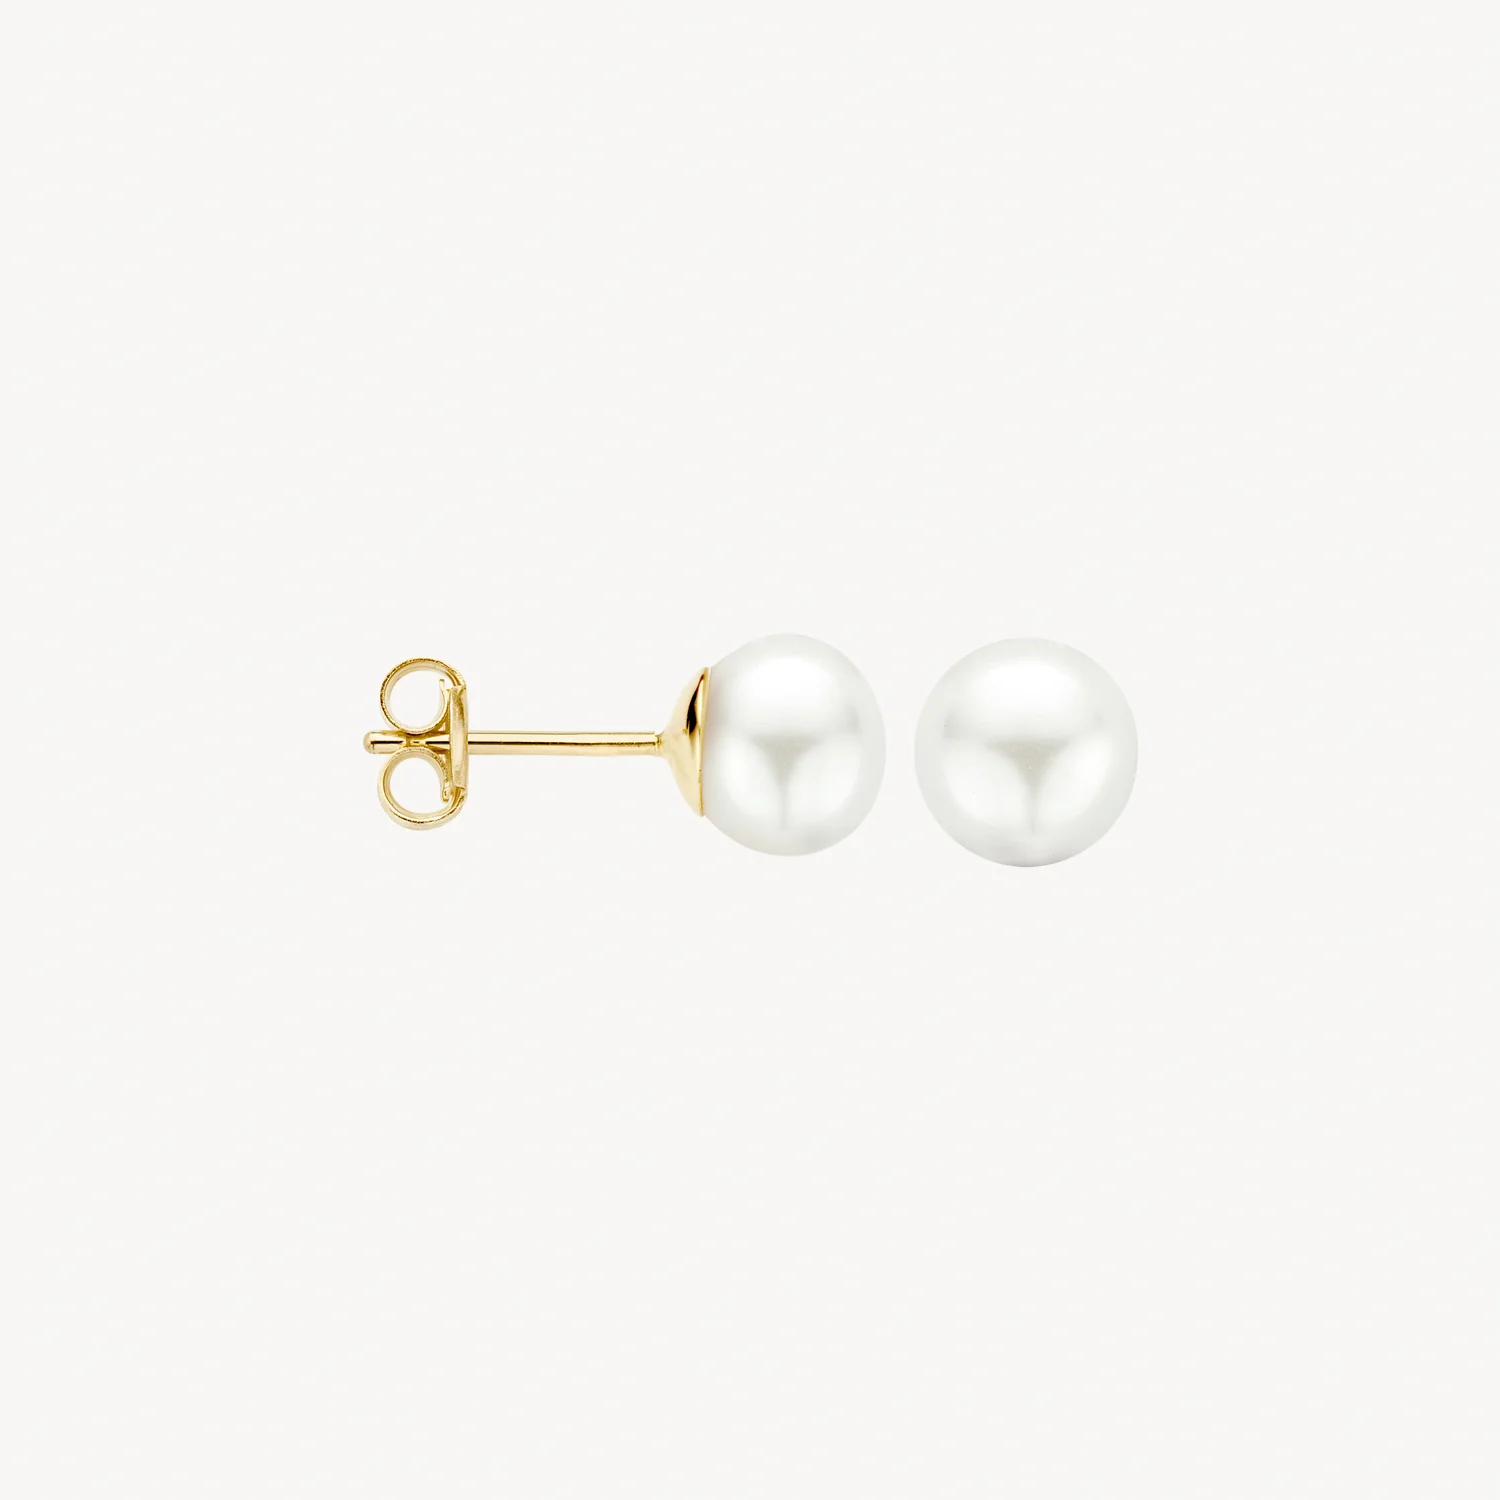 Blush Gold & Pearl Stud Earrings - Extra Large